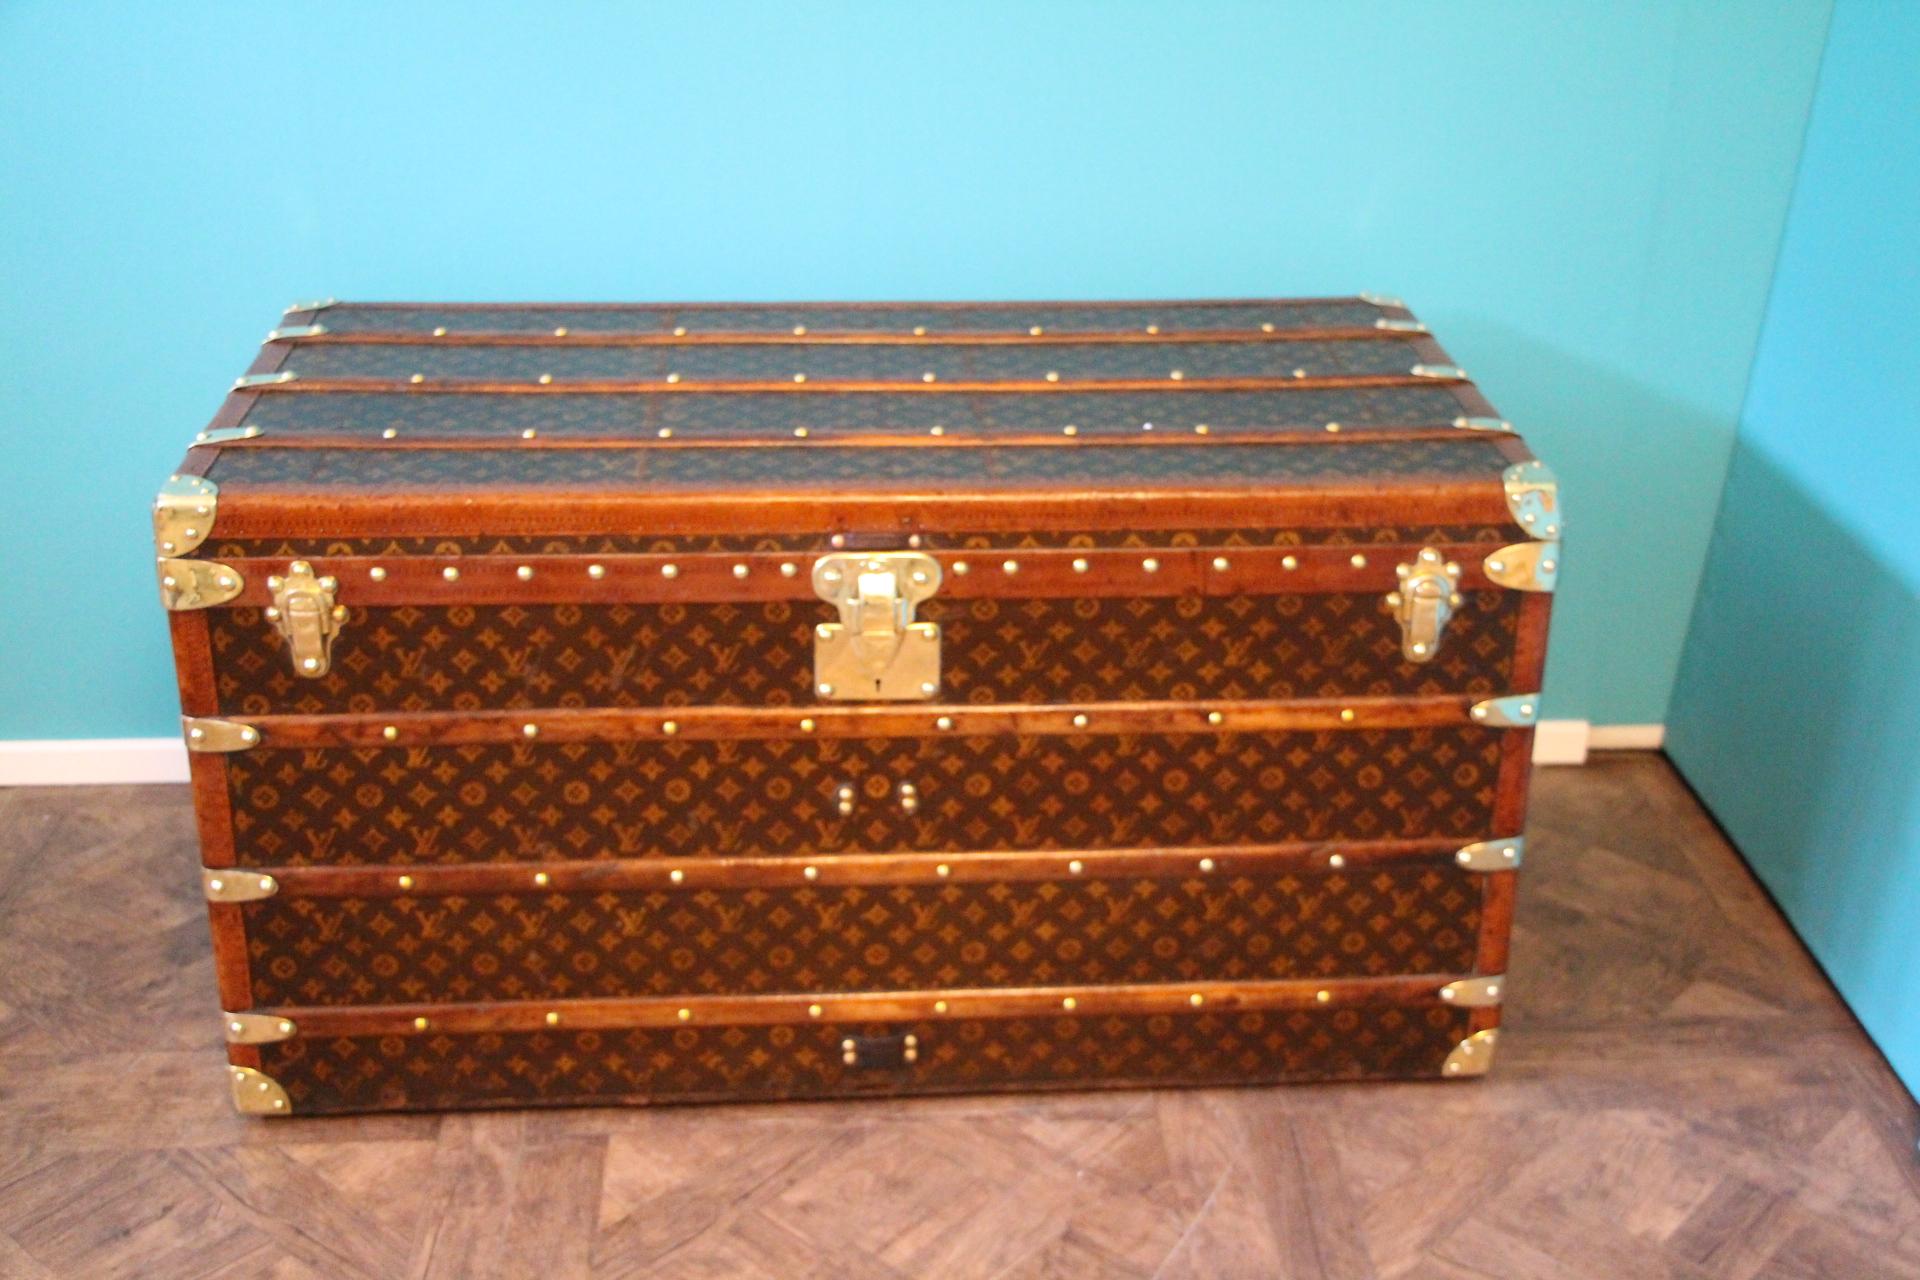 Magnificent Louis Vuitton steamer trunk featuring stenciled monogram canvas, honey color trim, stamped LV solid brass lock and clasps, brass corners and stamped LV studs. It has got a beautiful and warm patina. Leather side handles.

Original and